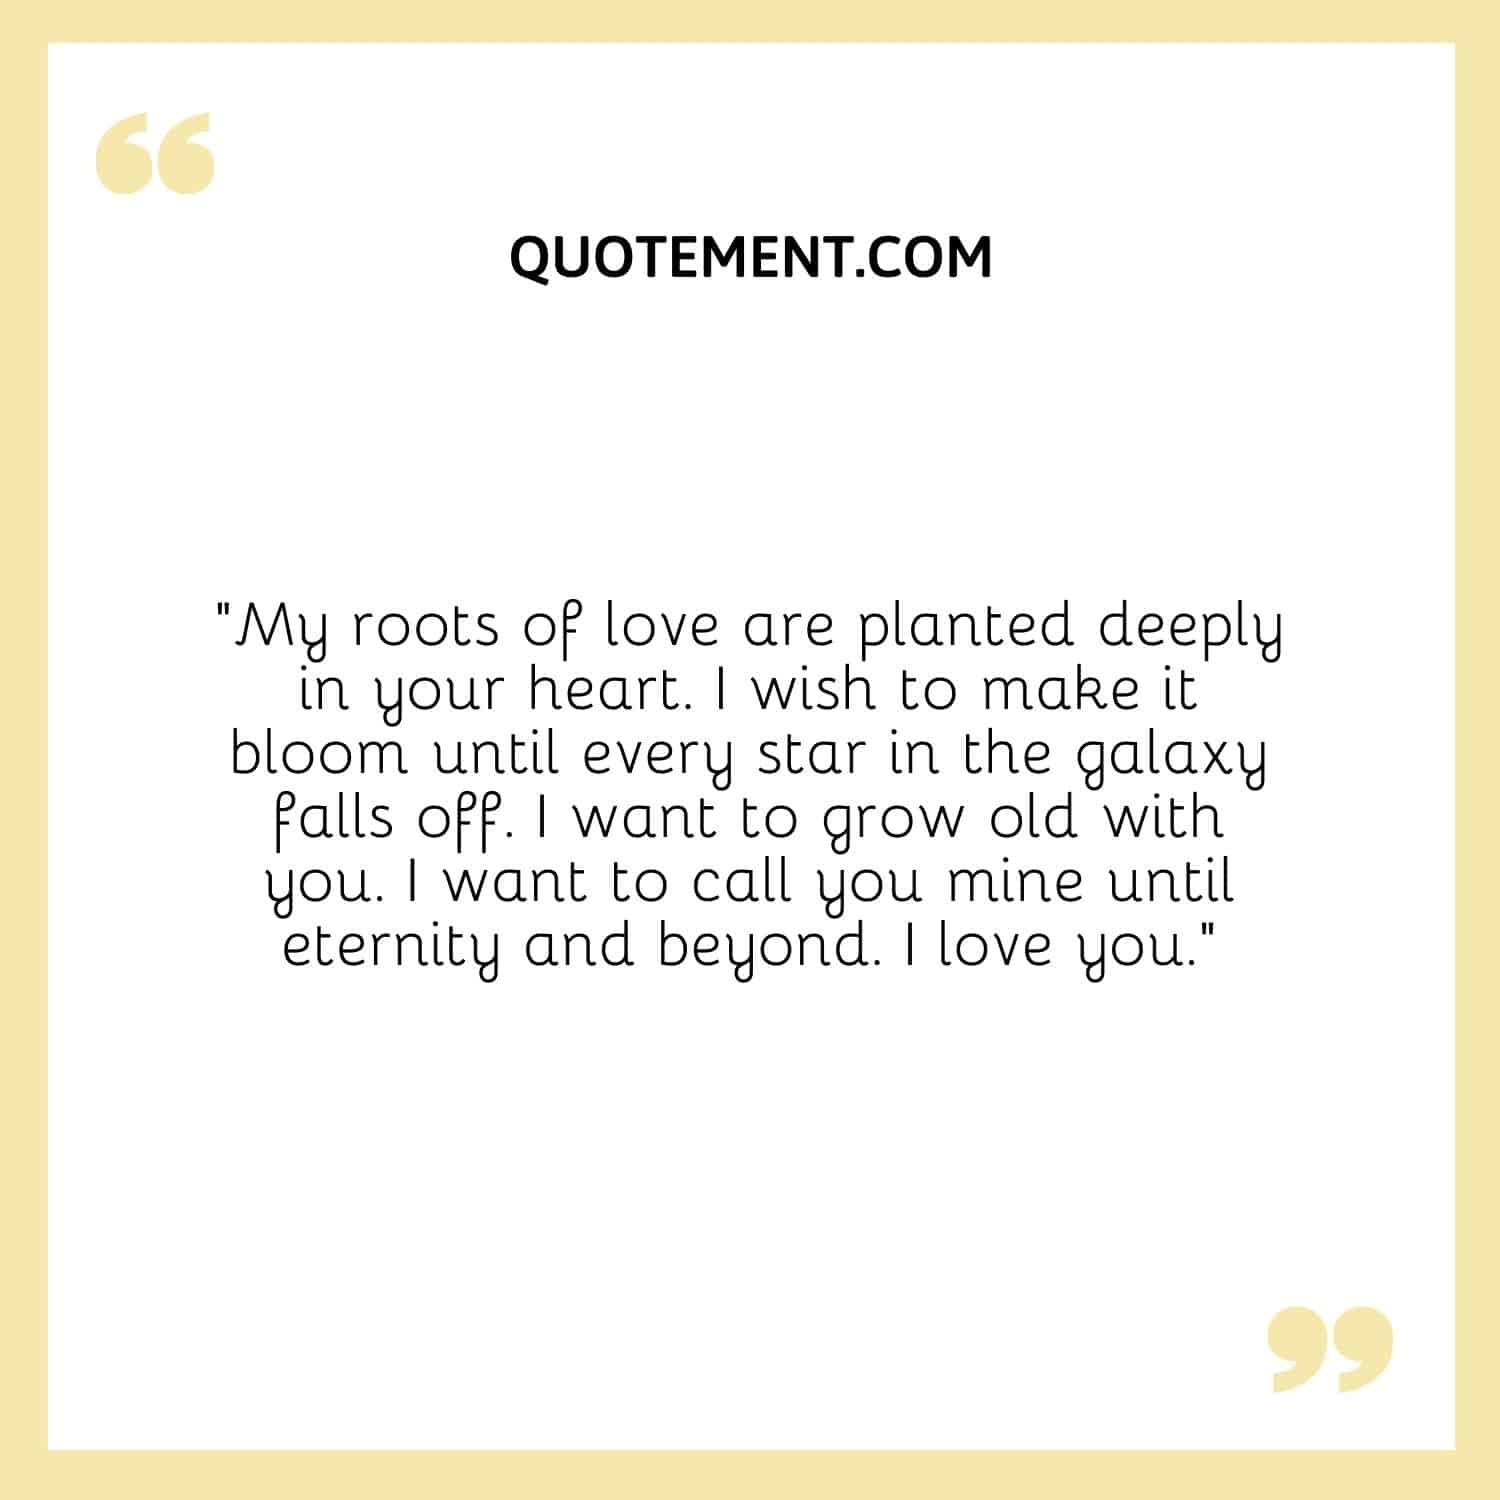 My roots of love are planted deeply in your heart